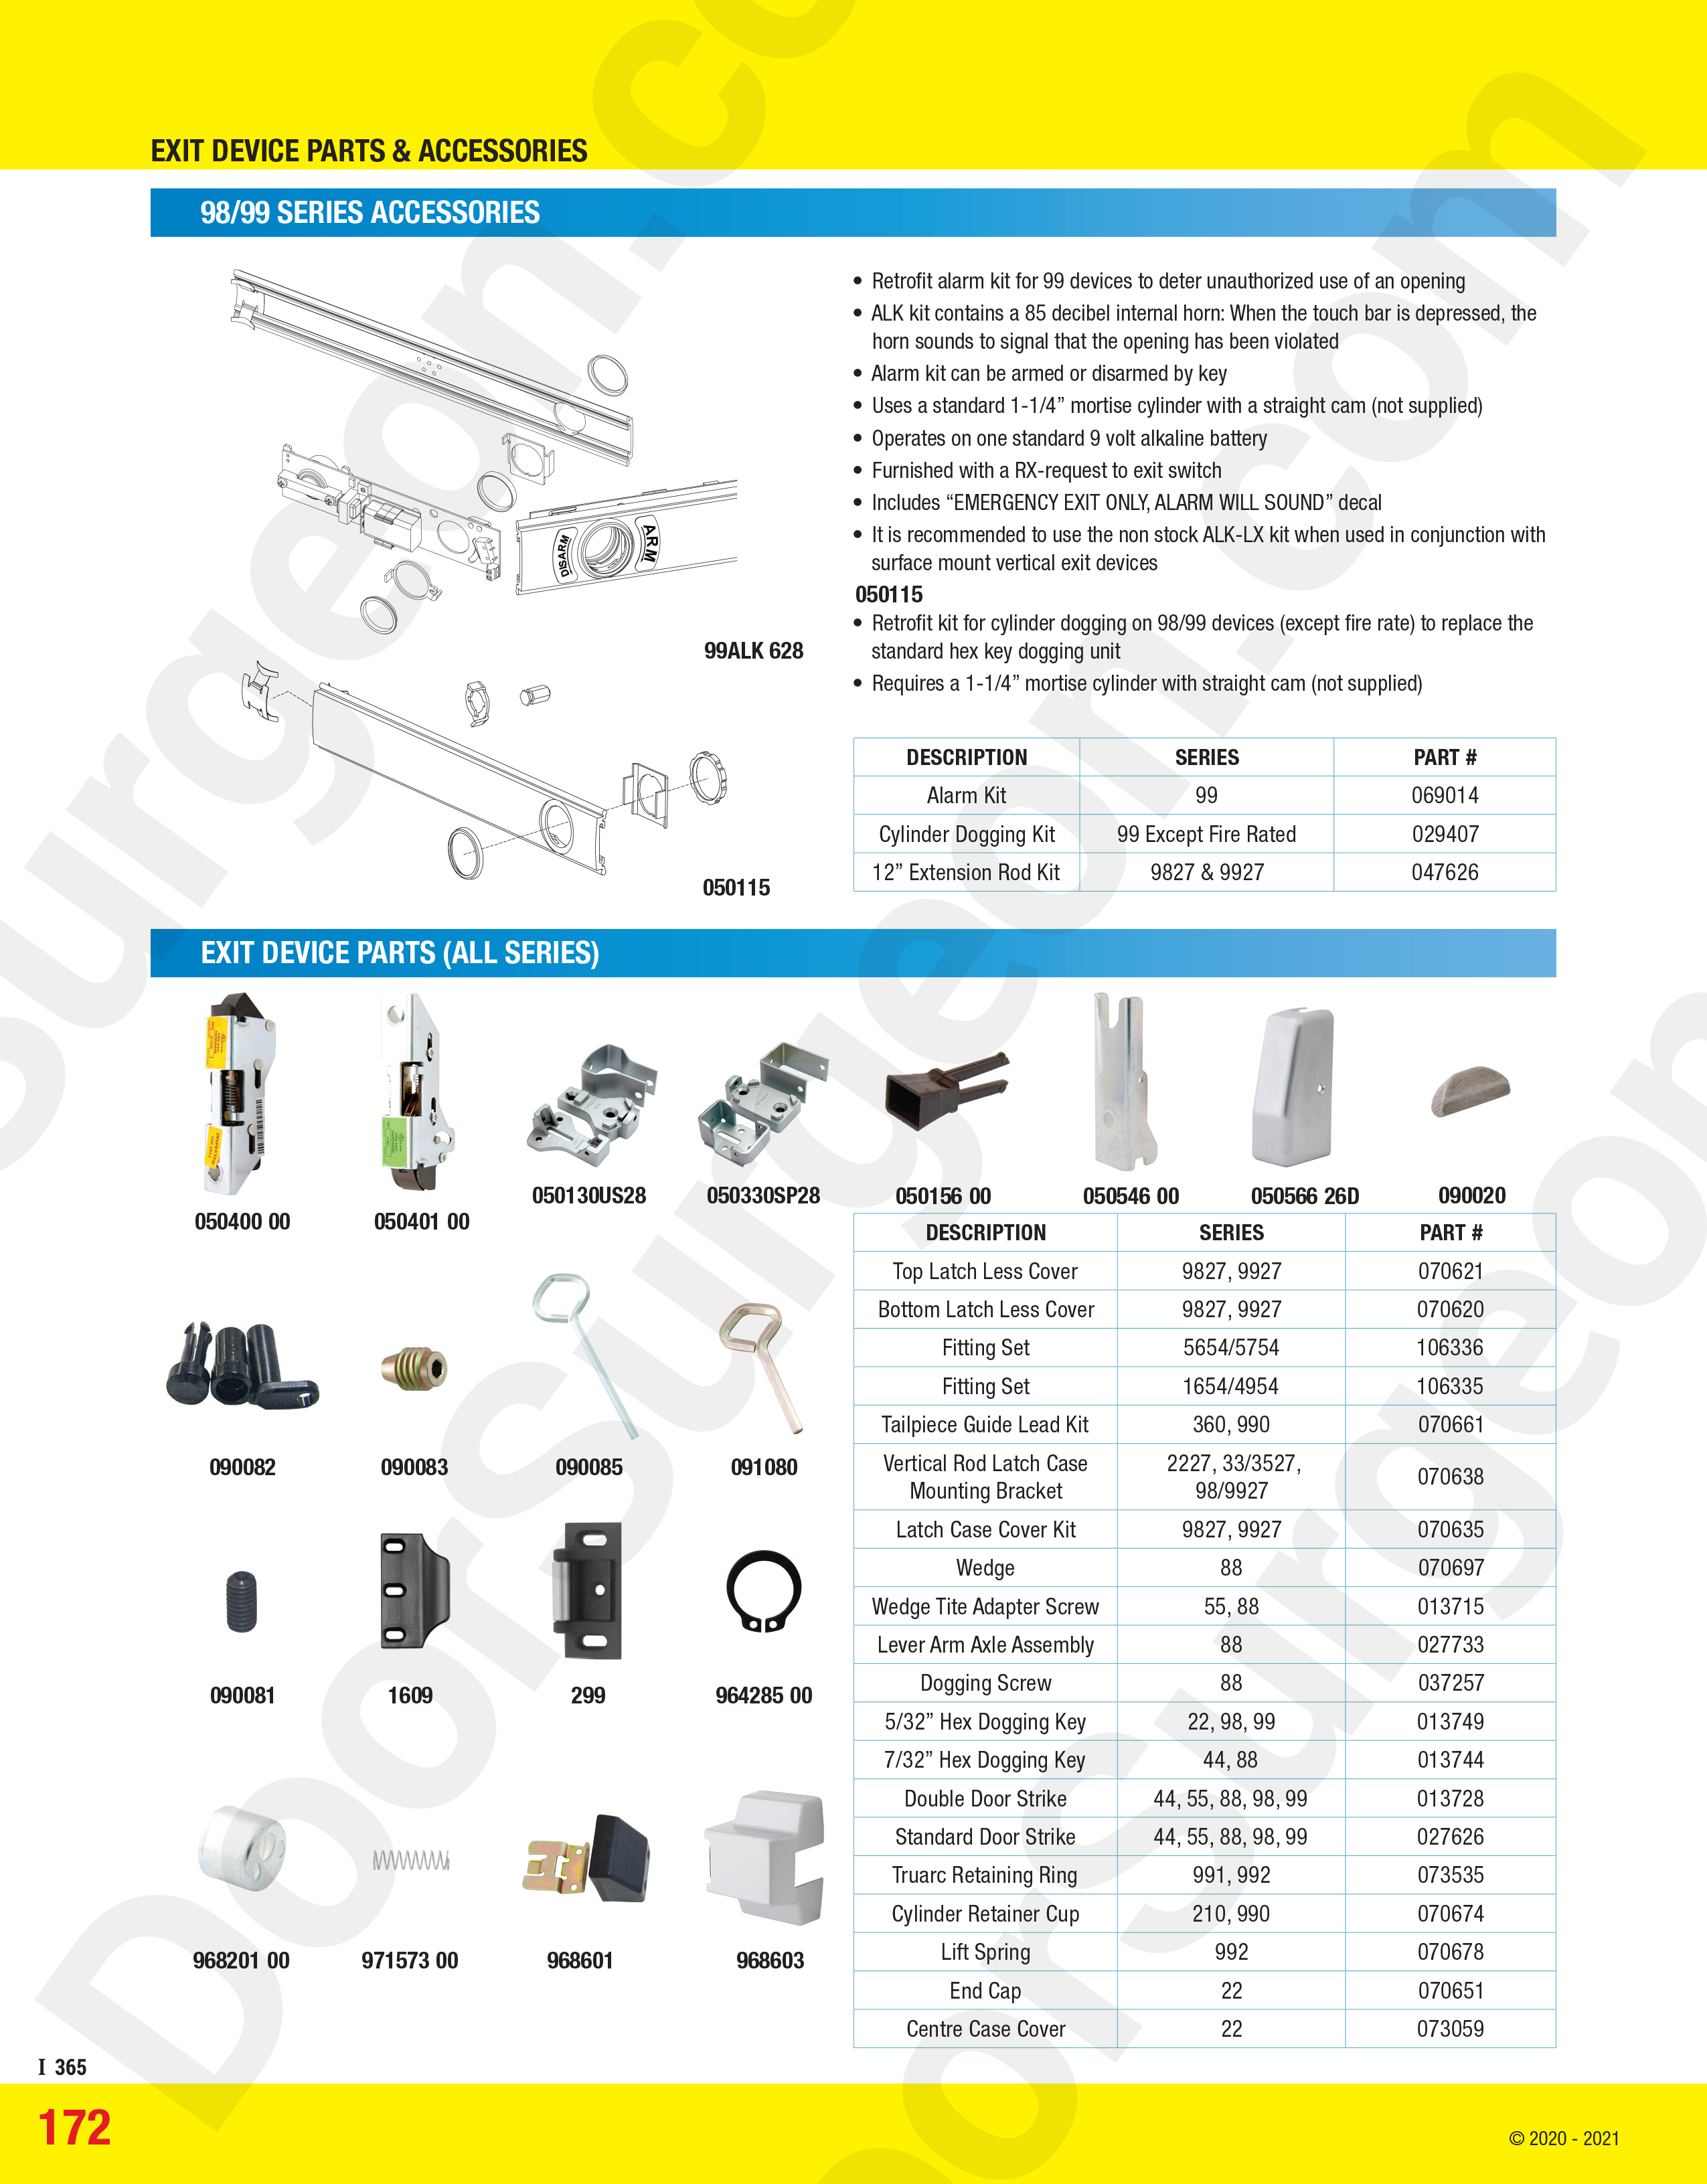 Door Surgeon Von Duprin panic bar exit device parts and accessory installation and sales.